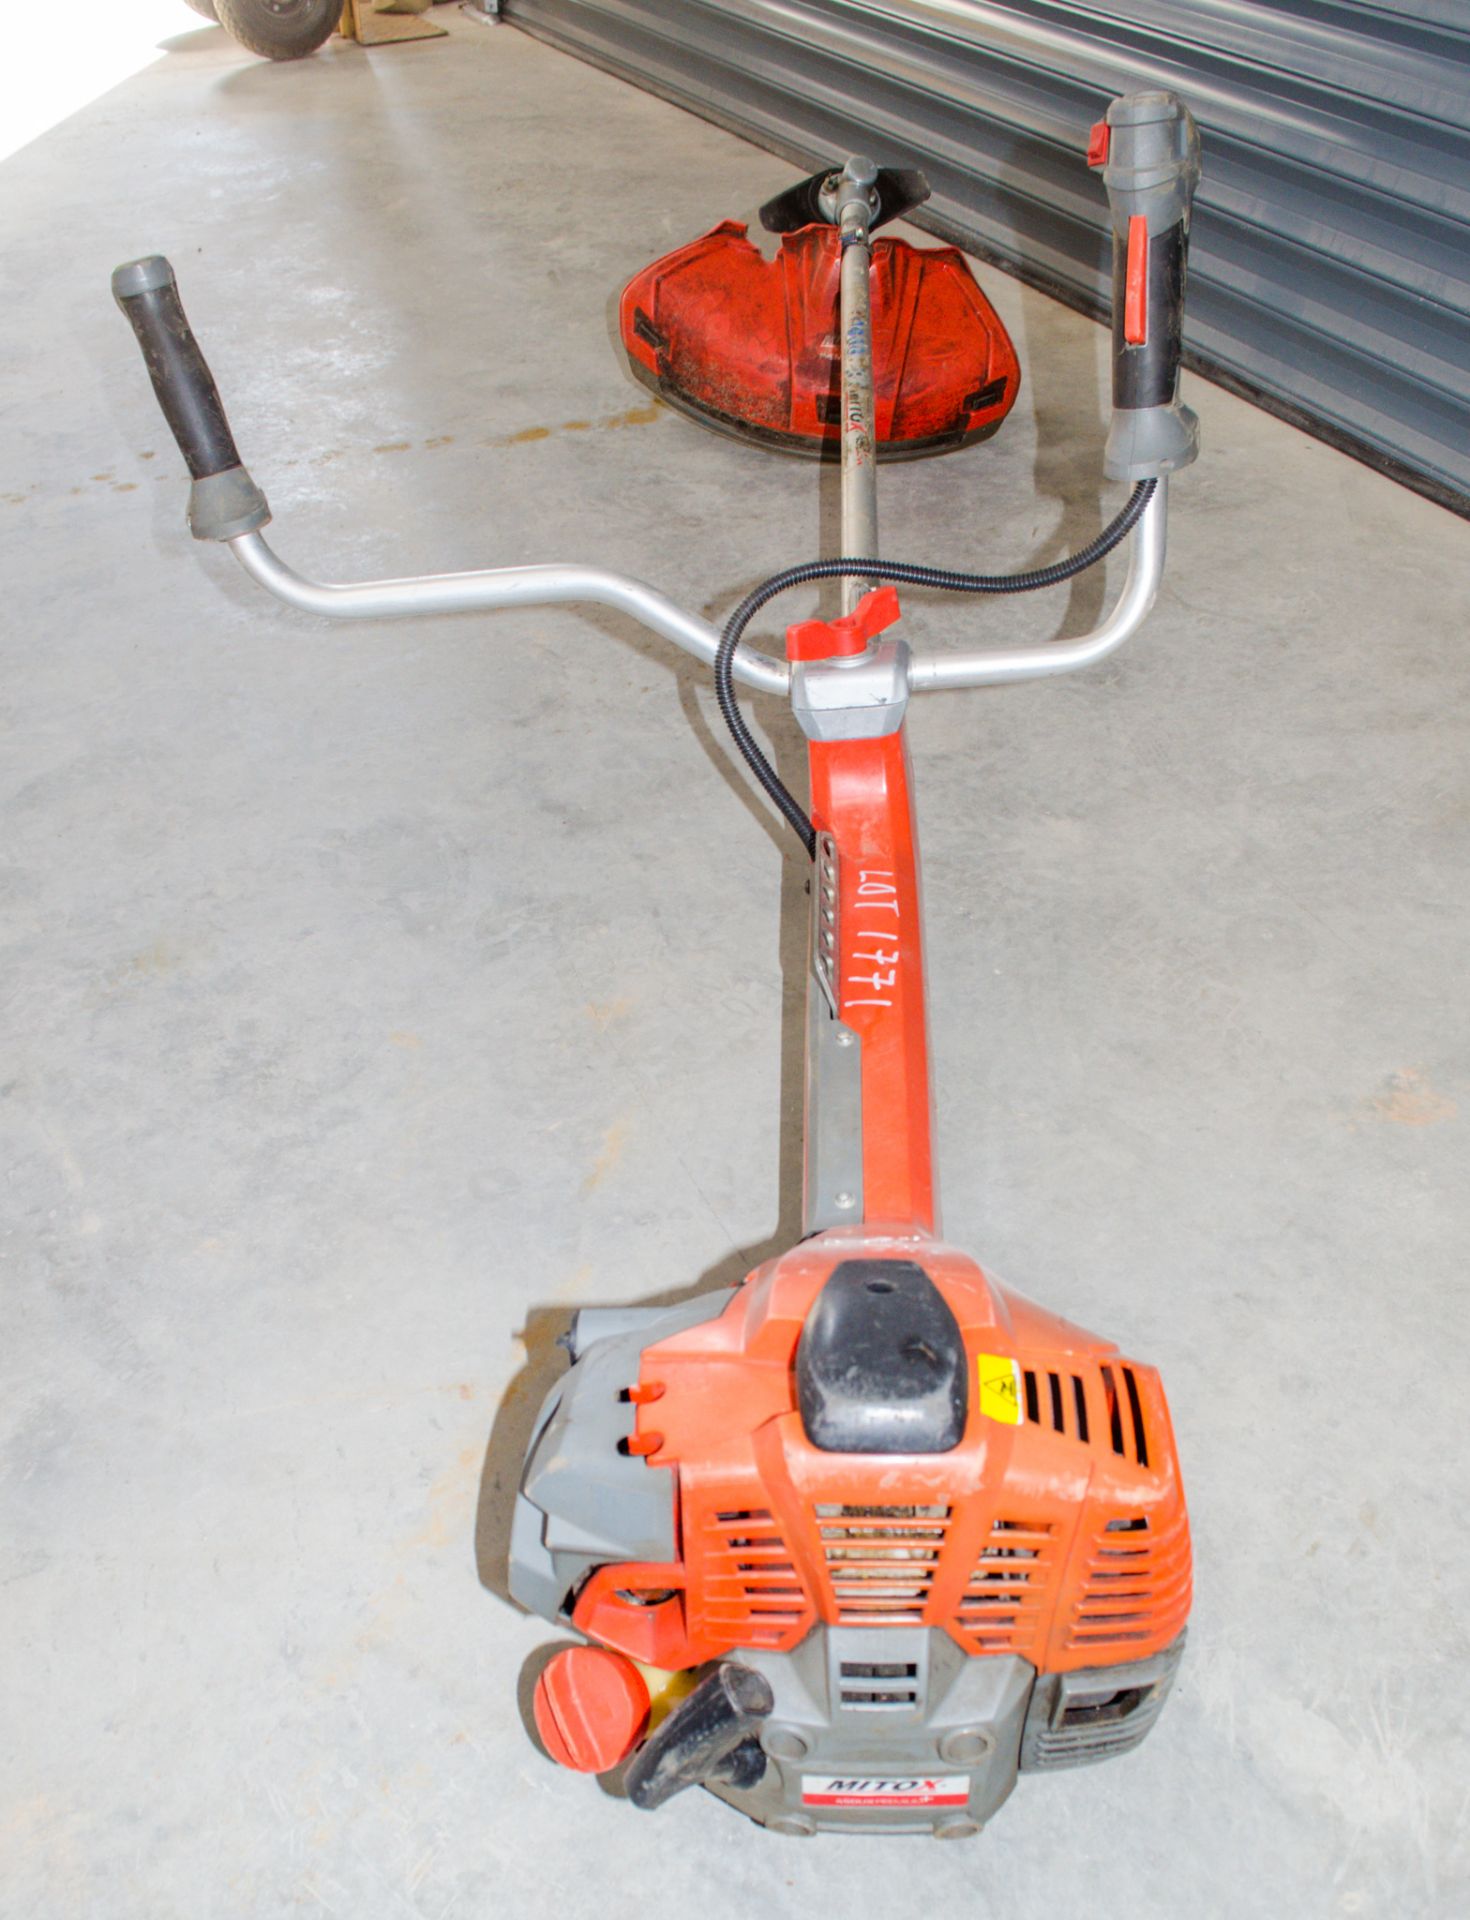 Mitox petrol driven strimmer LUS - Image 2 of 2